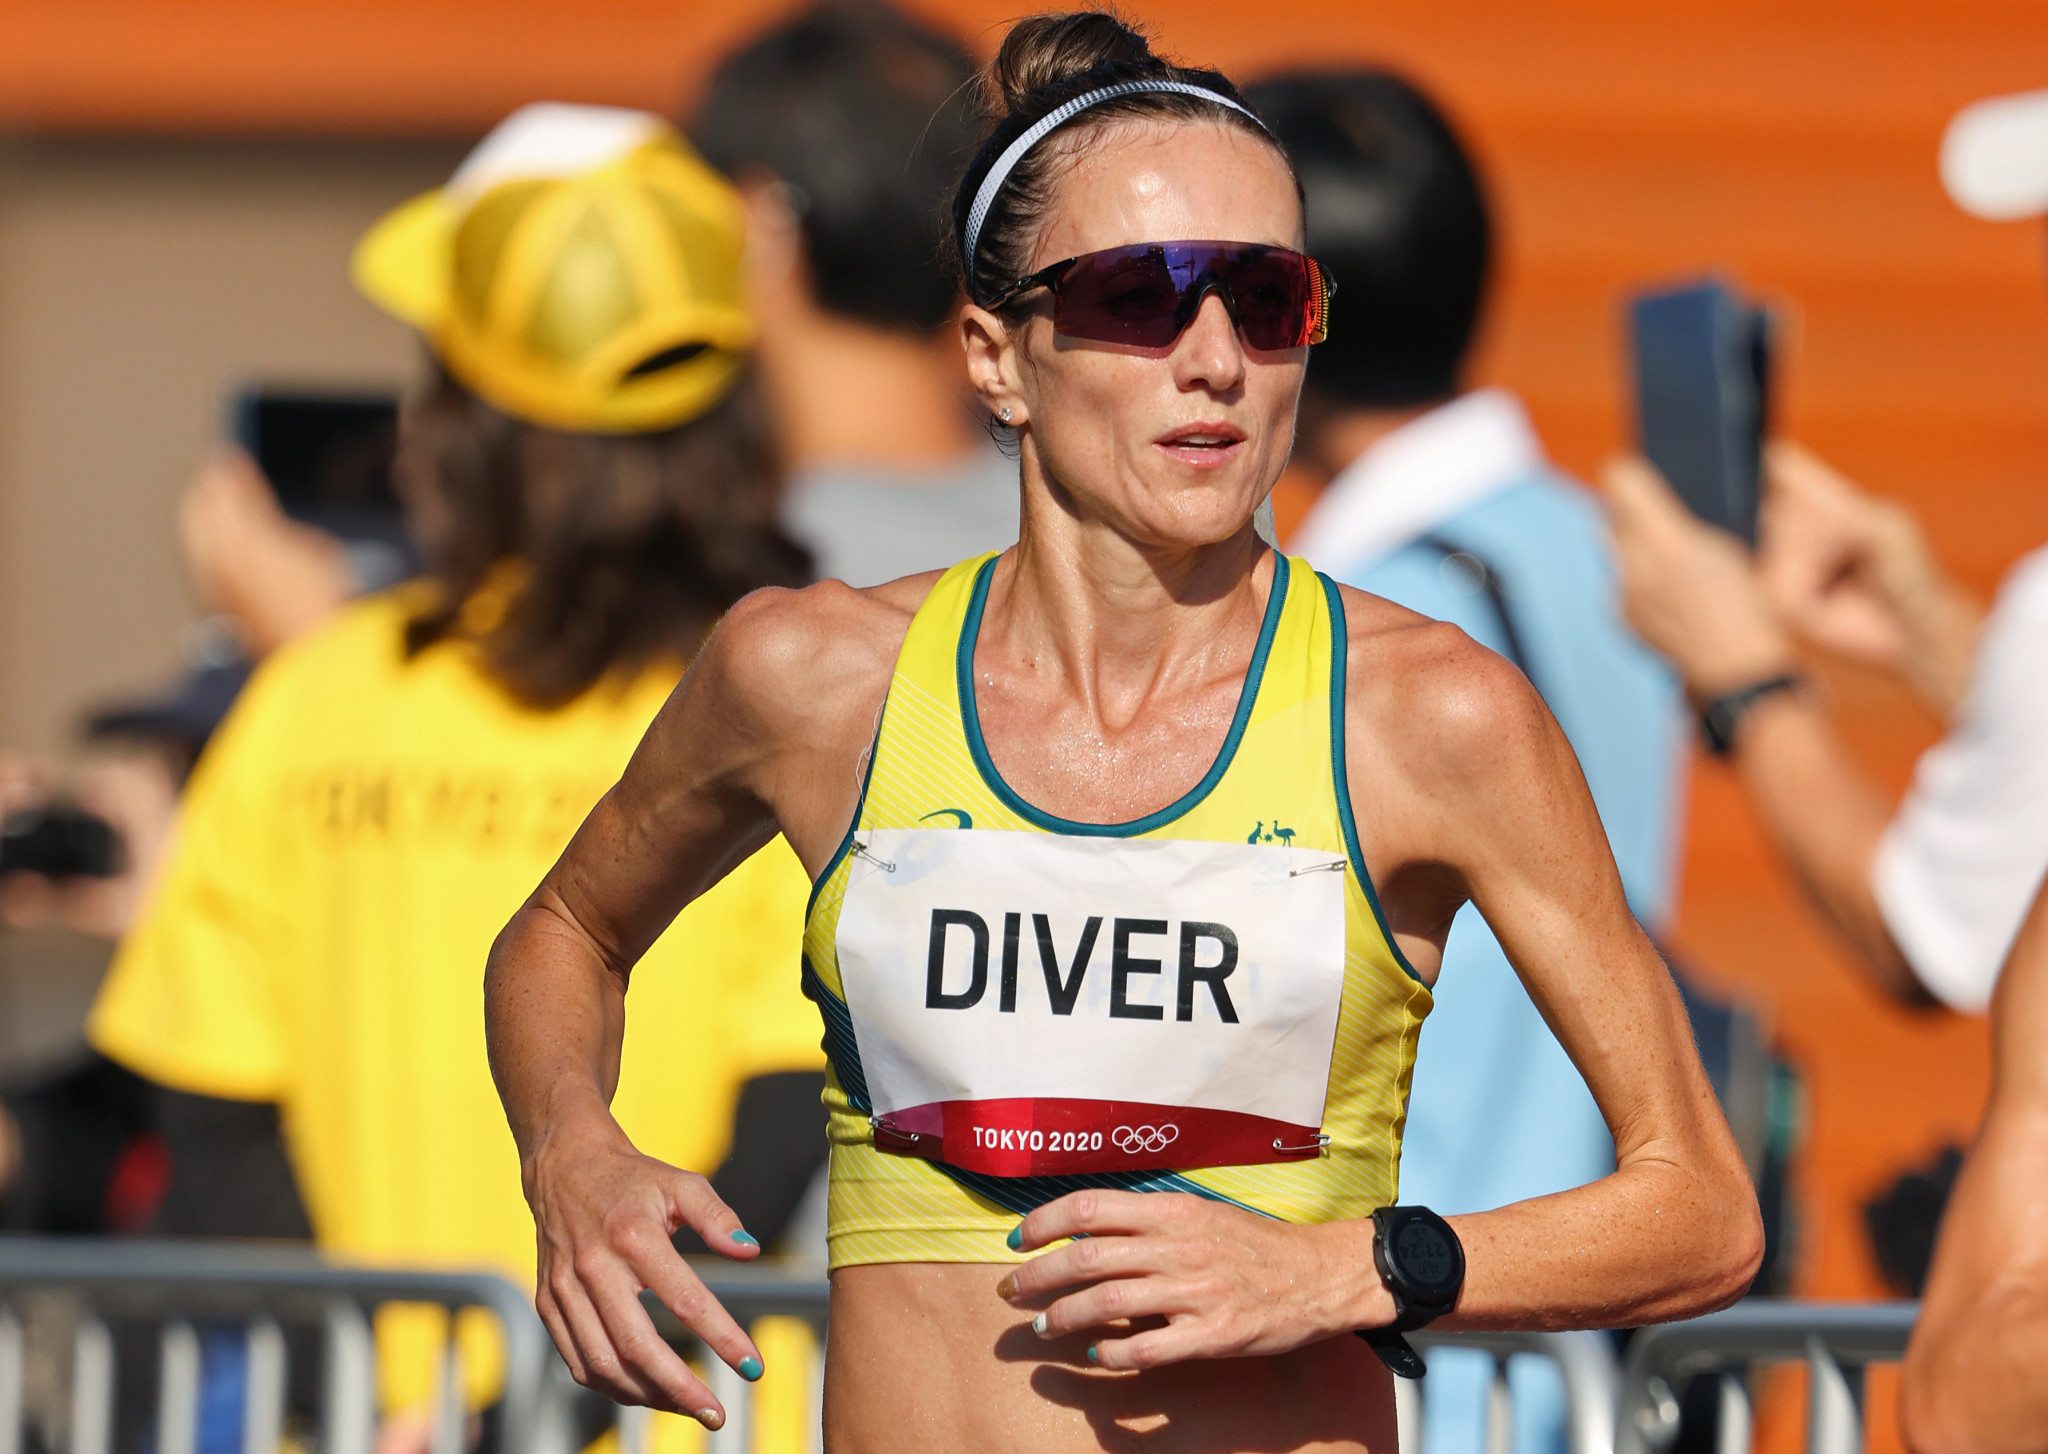 Sinead Driver will be looking to win a Commonwealth Games medal in the marathon at the age of 45 ©Getty Images